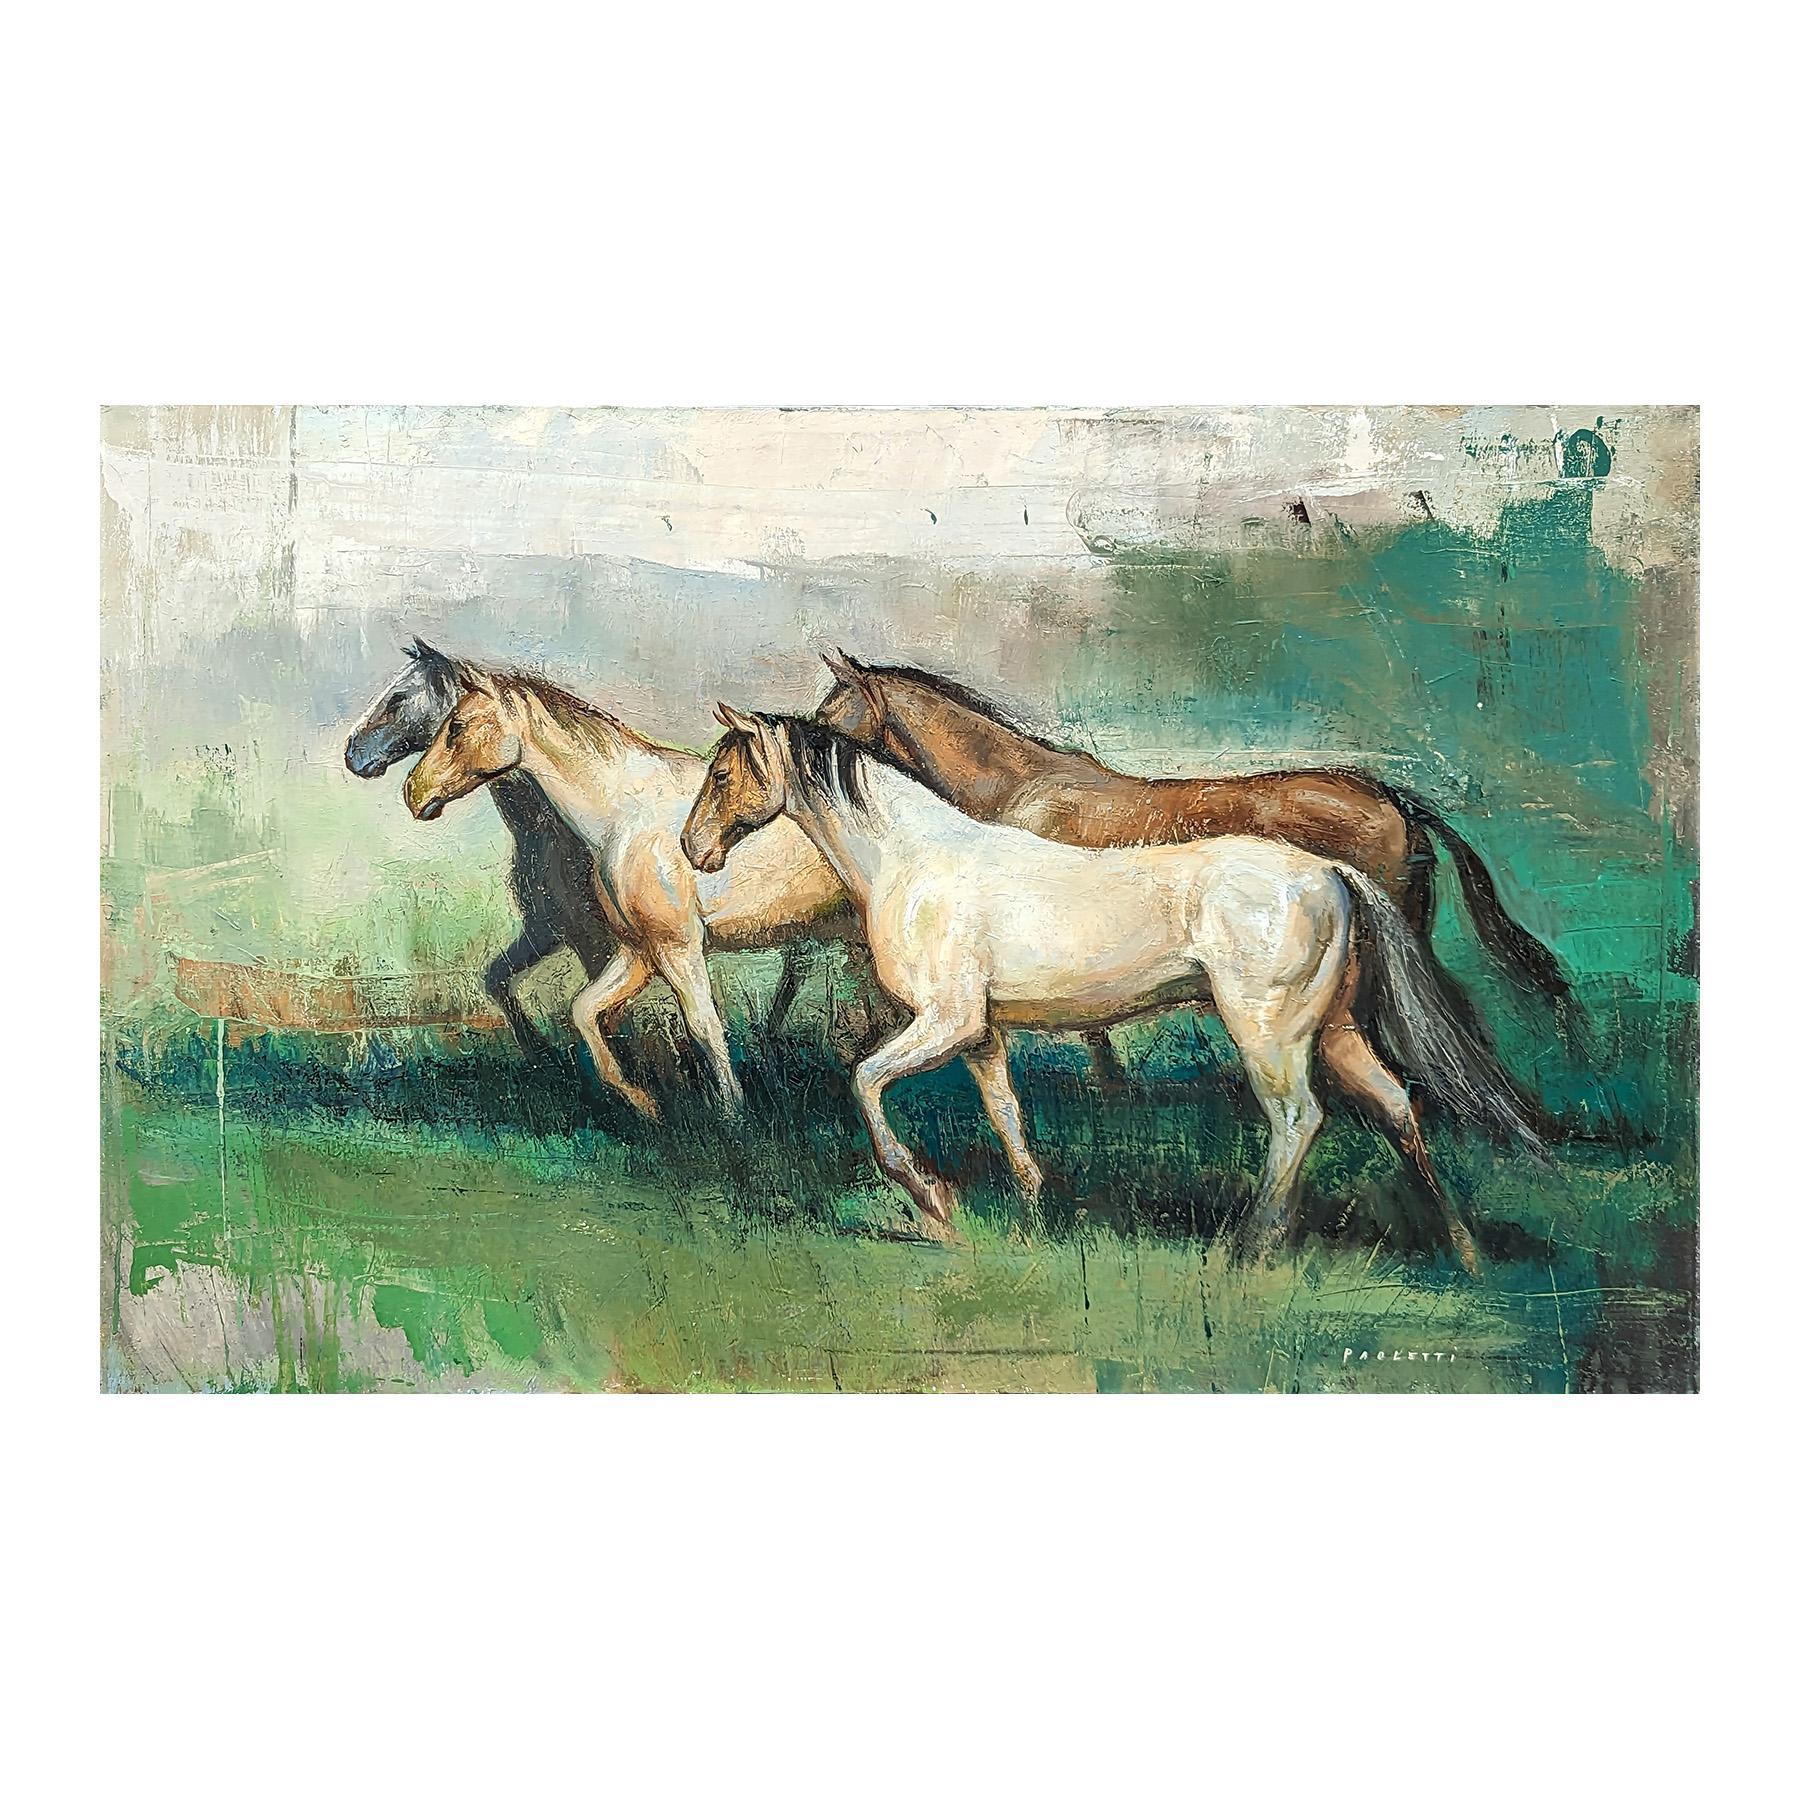 Naturalistic animal painting by contemporary artist Matthew Paoletti. The work features a group of brown and tan horses running through an abstract green field. Signed by the artist in the front lower right corner. Currently unframed, but options